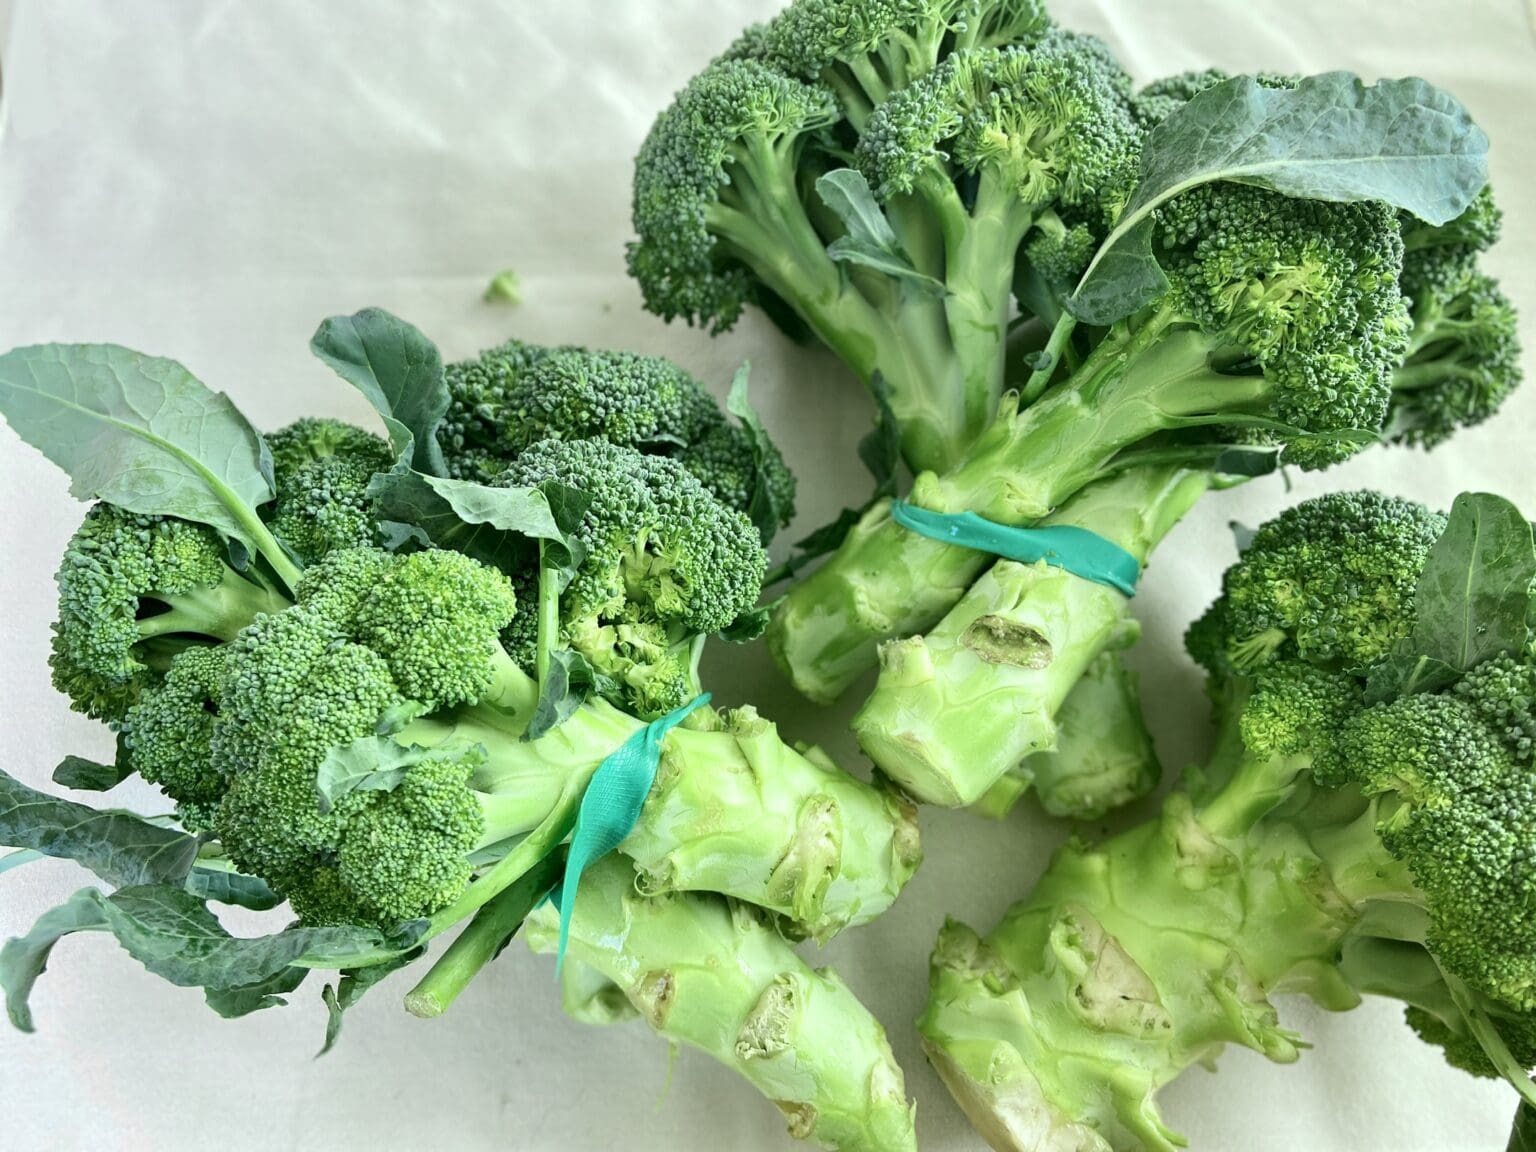 Tied broccoli lay next to each other.